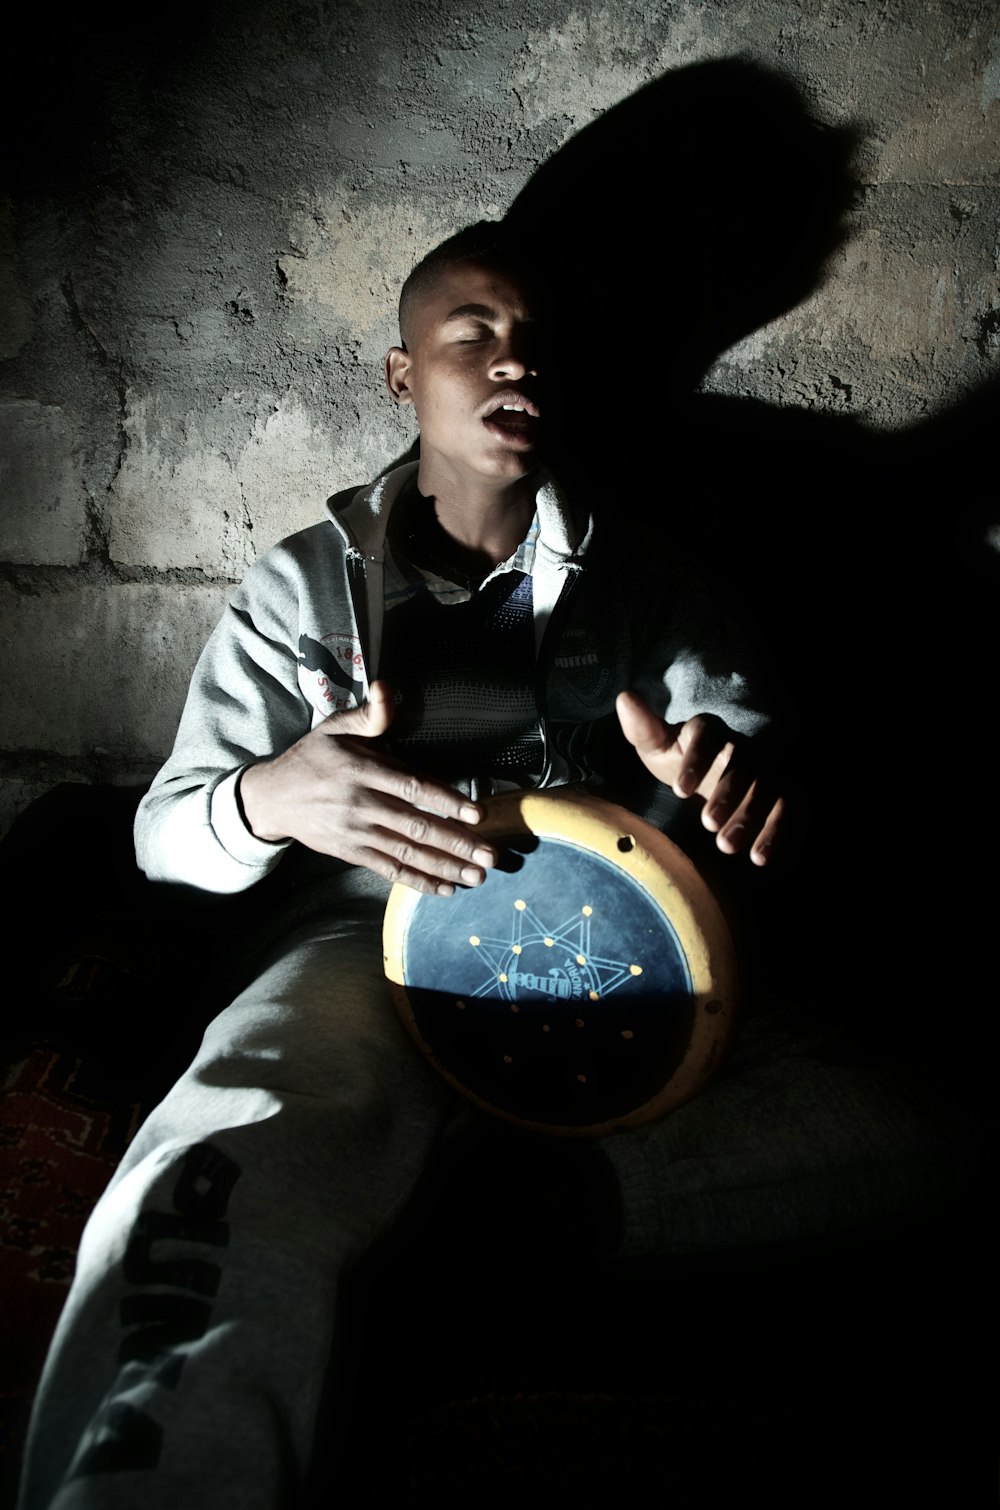 man playing percussion instrument near wall